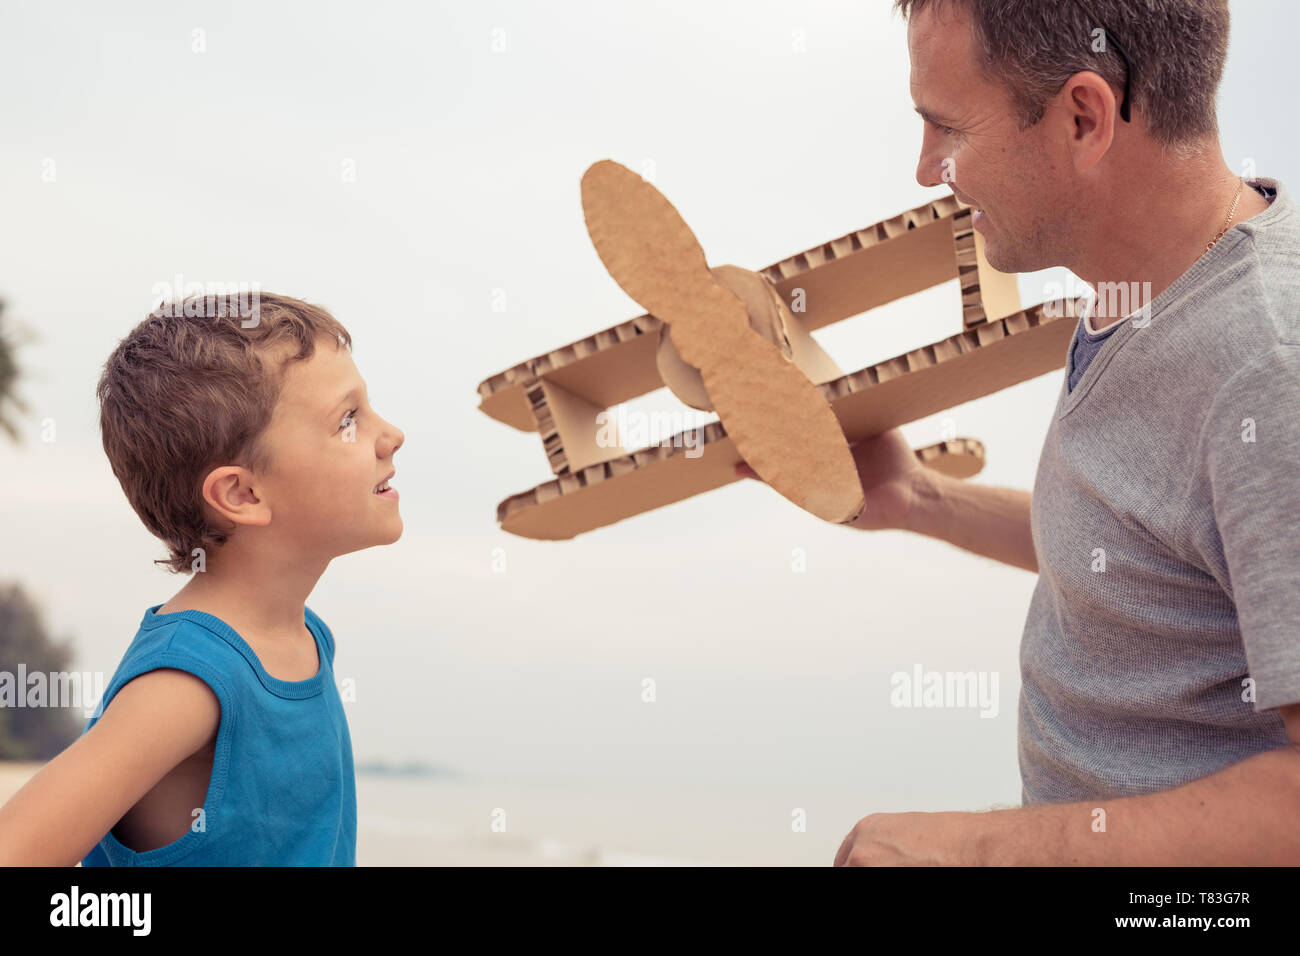 Father and son playing with cardboard toy airplane in the park at the day time. Concept of friendly family. People having fun outdoors on the beach. Stock Photo